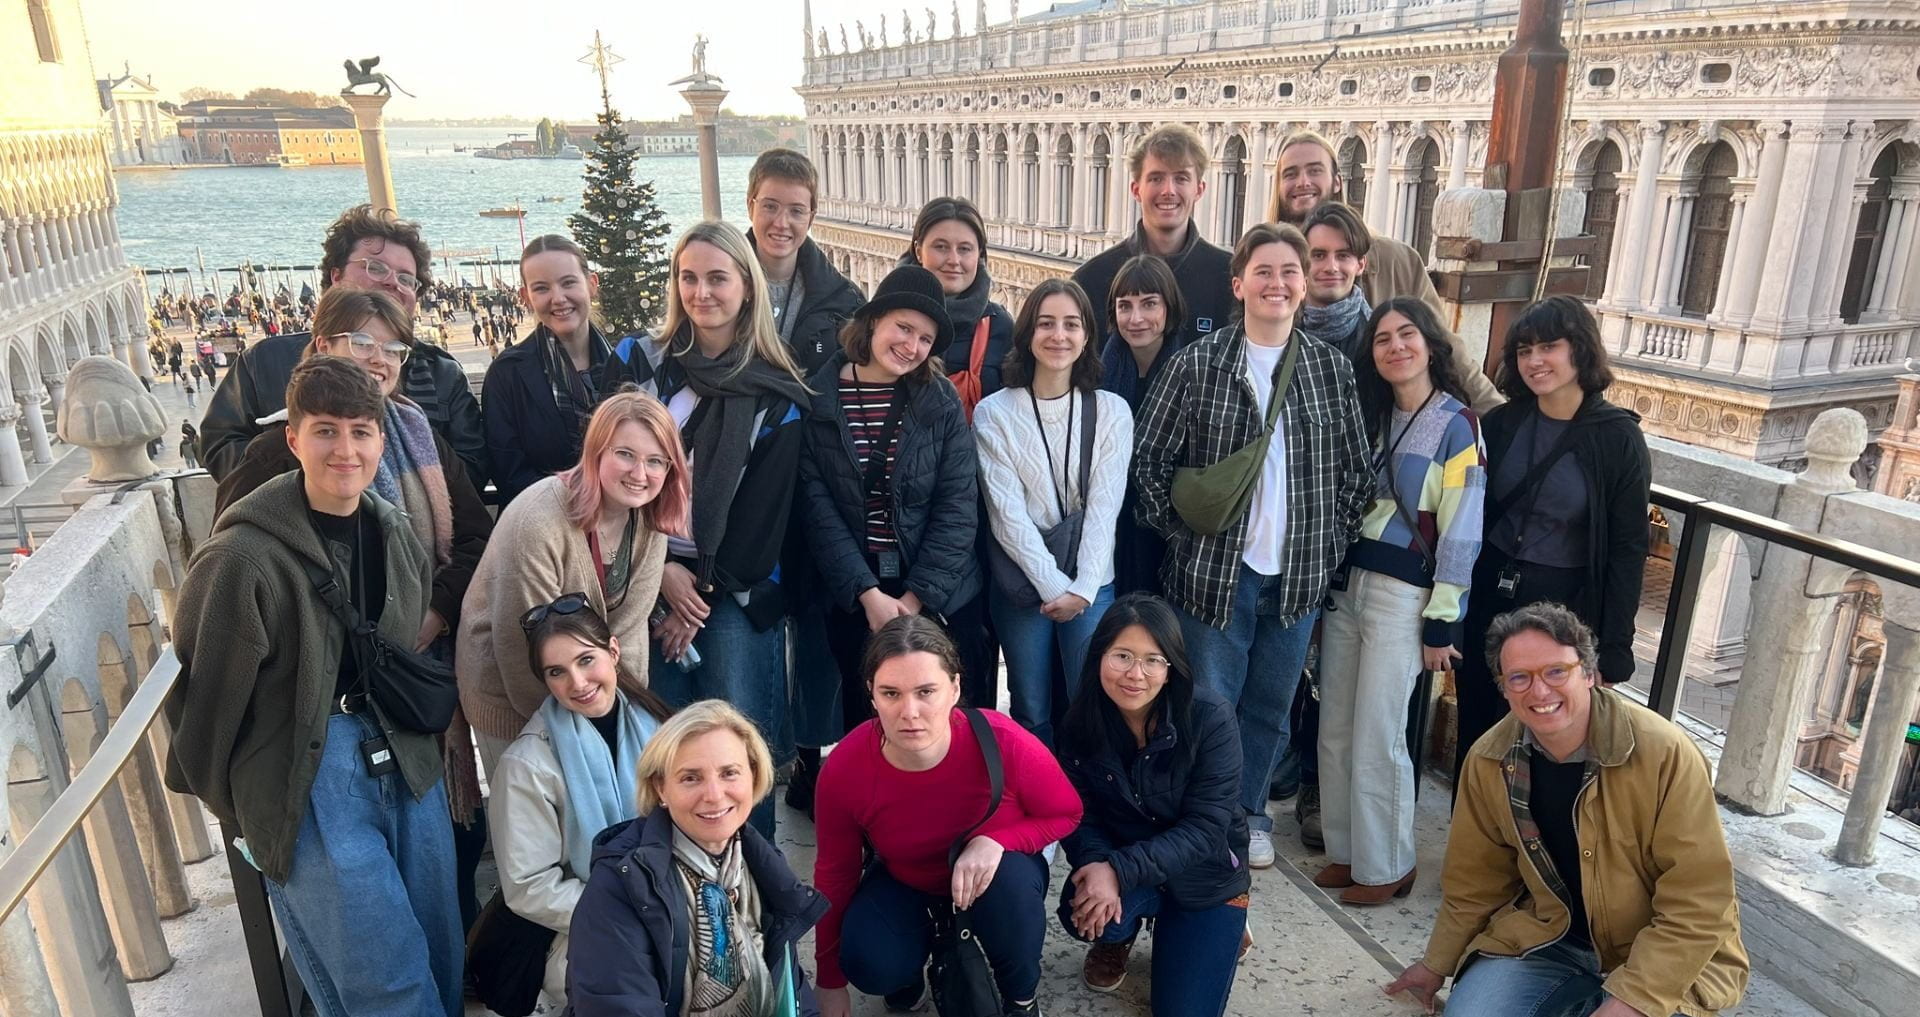 The Venice Overseas Intensive has been inaugurated for the first time since COVID interruptions to student travel. Andrea Rizzi (SOLL) and Catherine Kovesi (SHAPS) are pictured here atop Saint Mark's Basilica with this year's cohort.